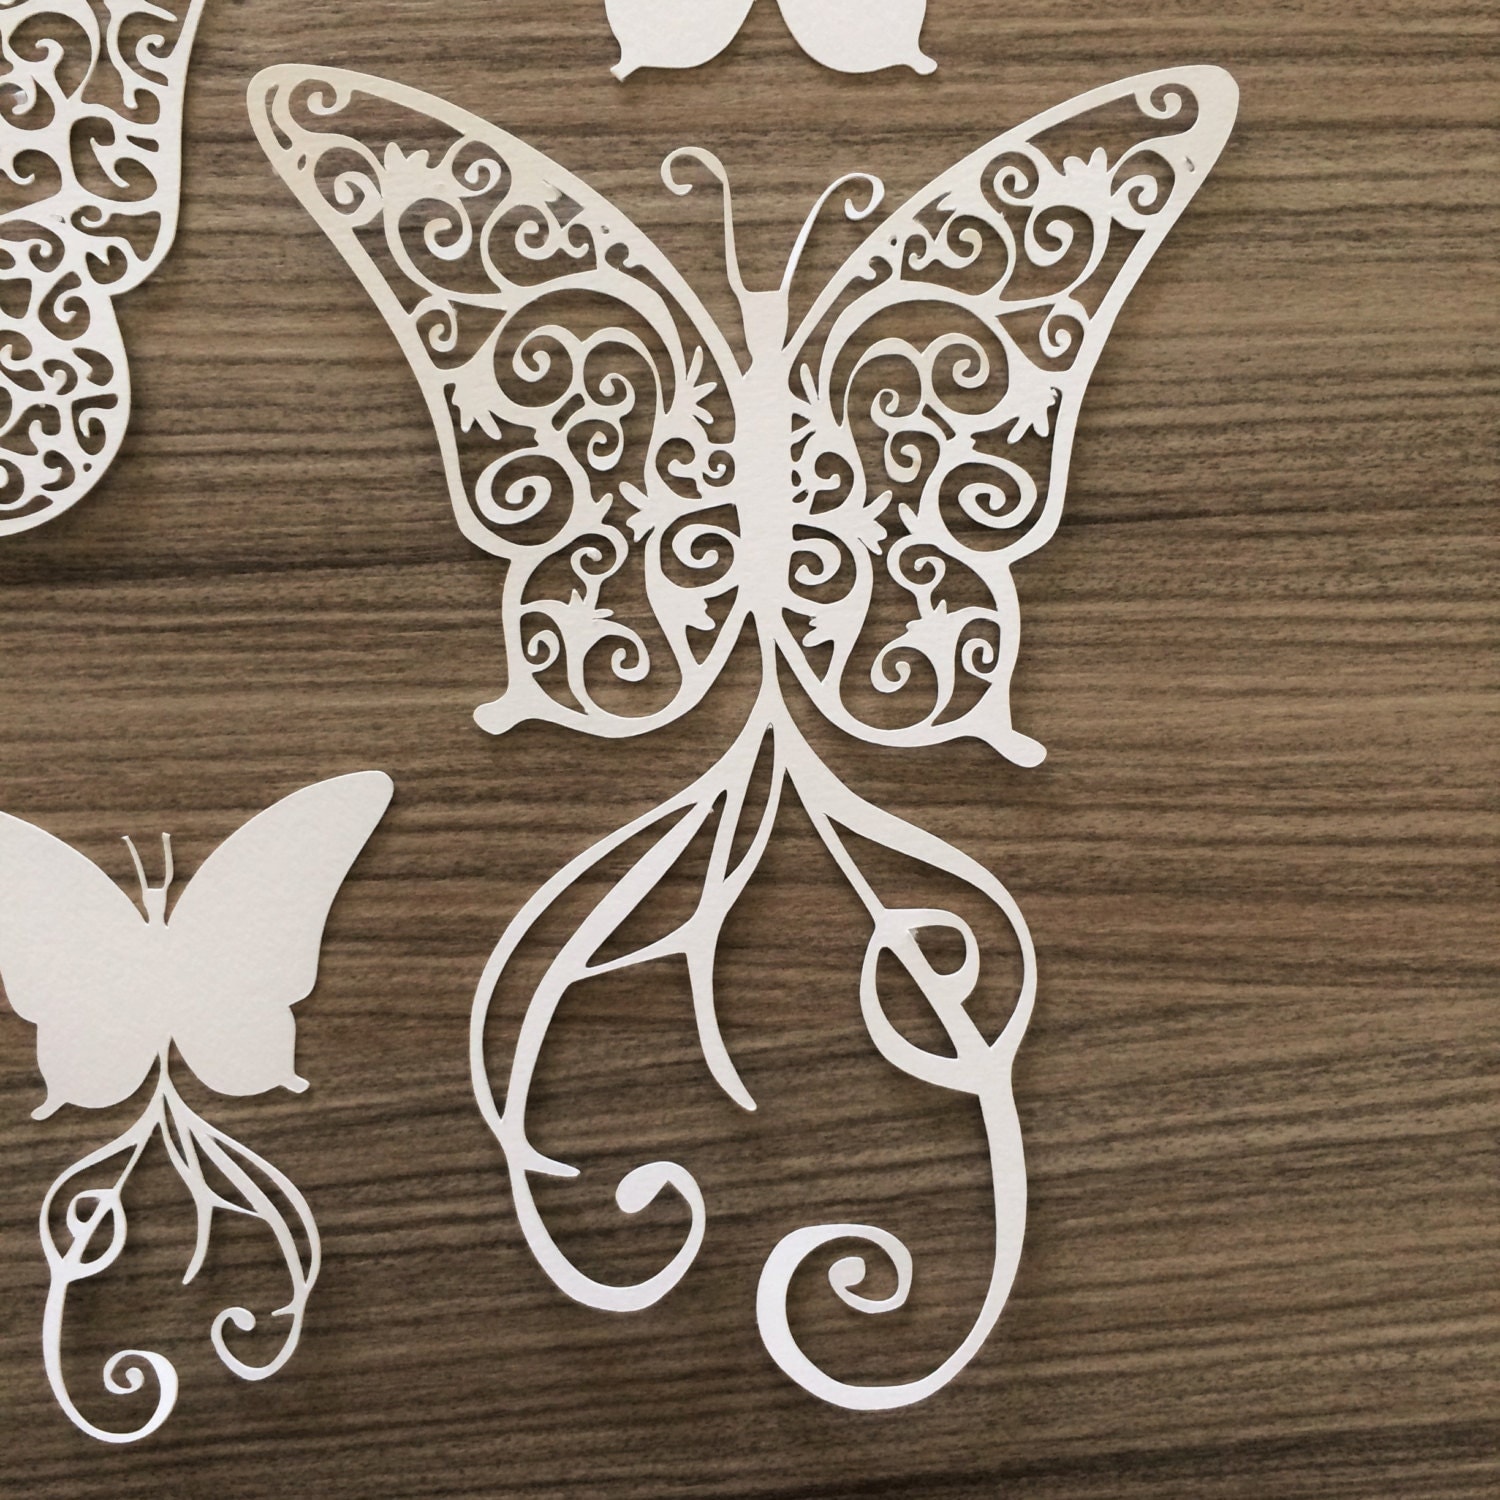 Download Butterflies SVG cutting file and butterfly DXF cut file